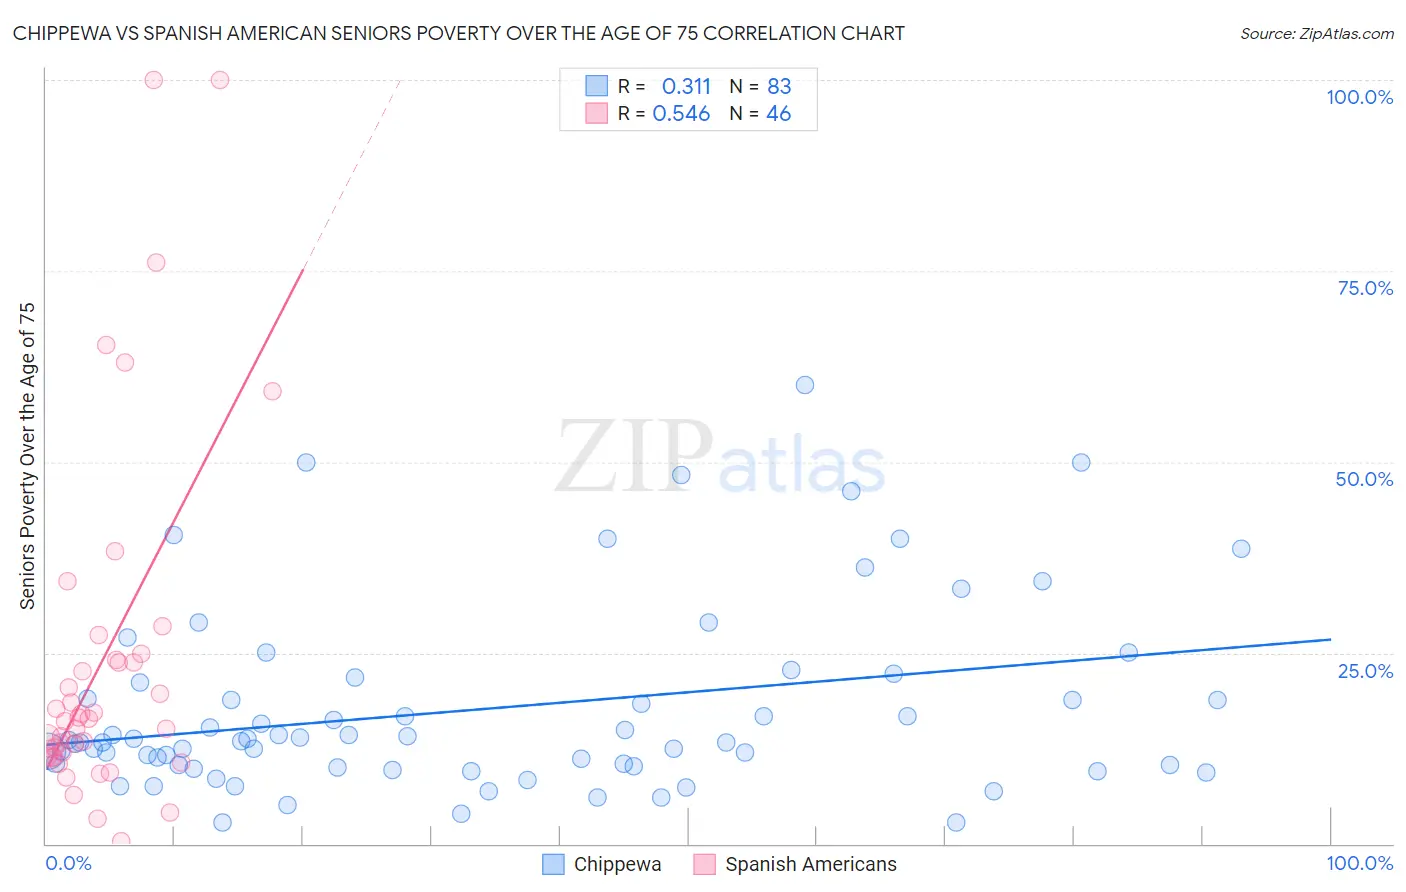 Chippewa vs Spanish American Seniors Poverty Over the Age of 75